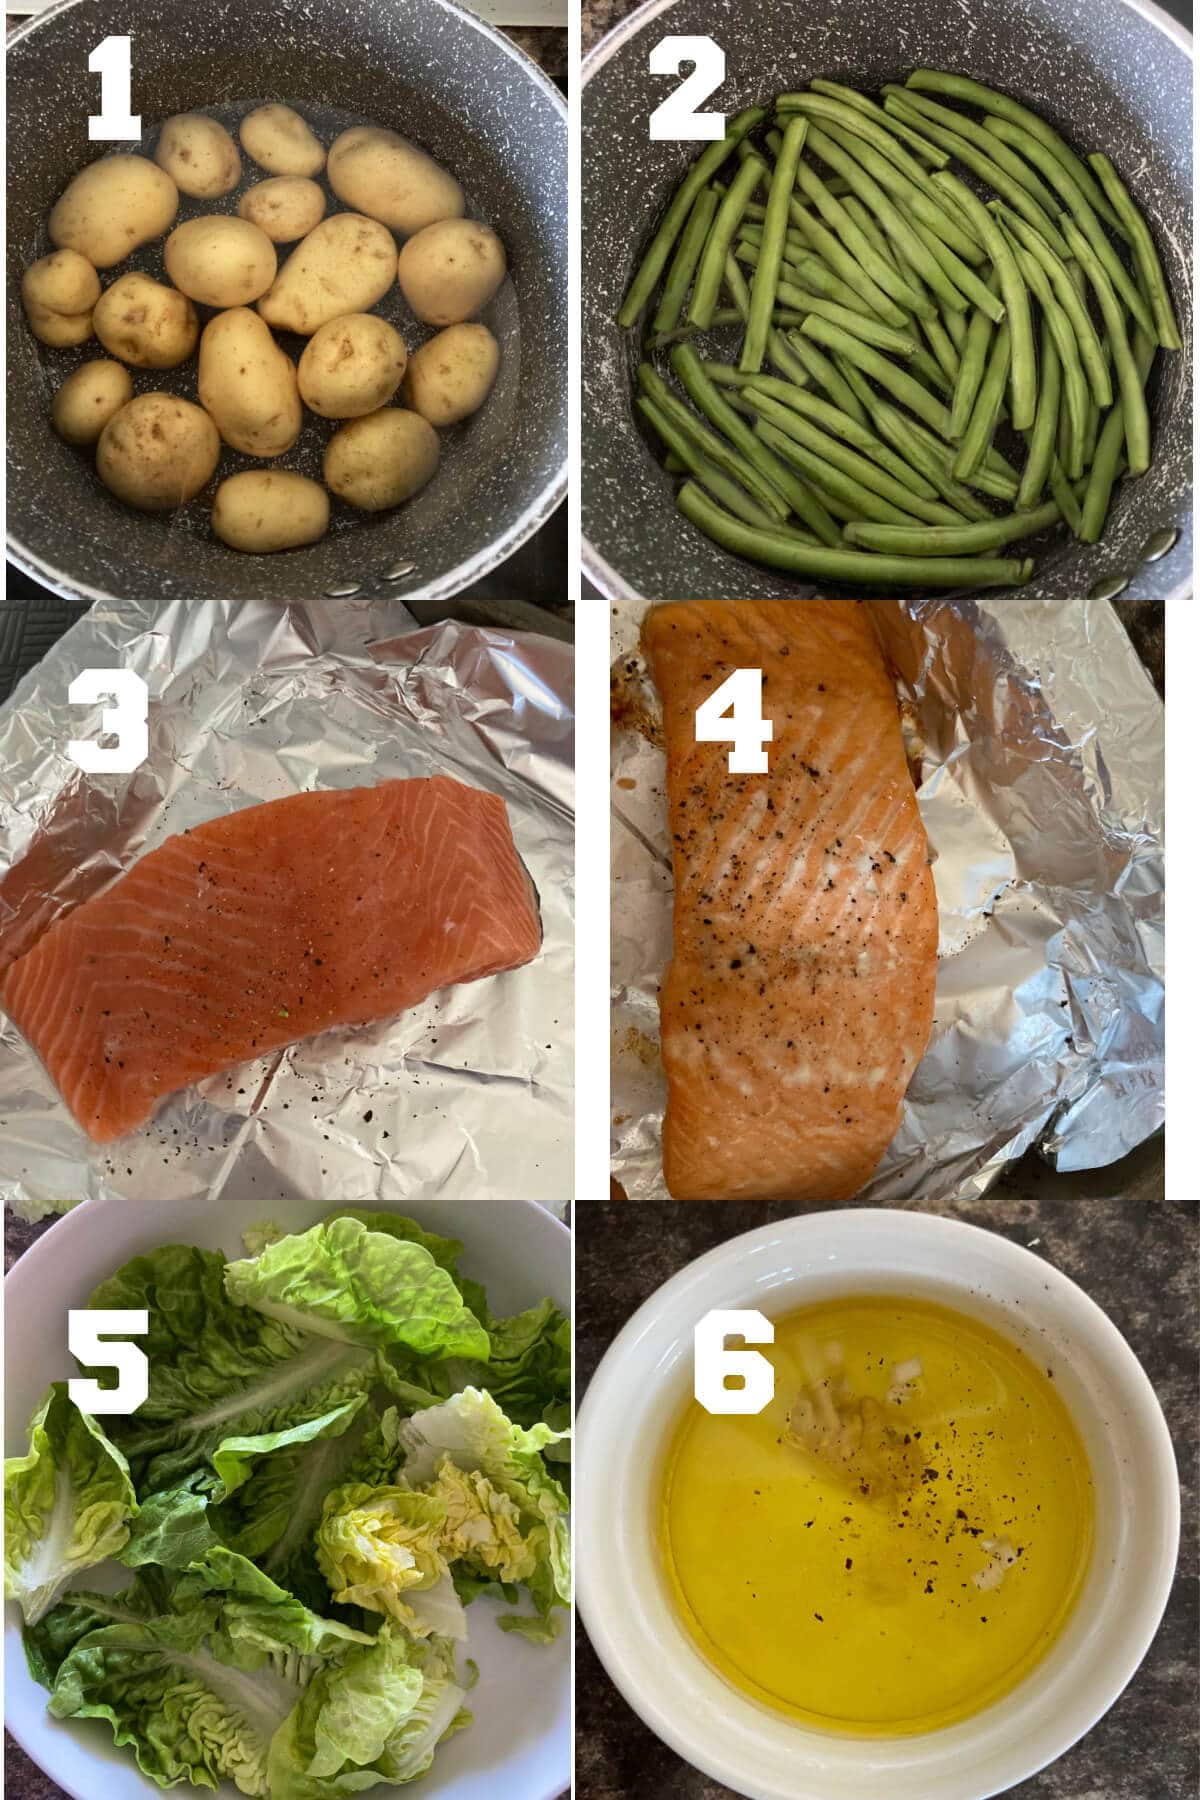 Collage of 6 photos to show how to make salmon nicoise.